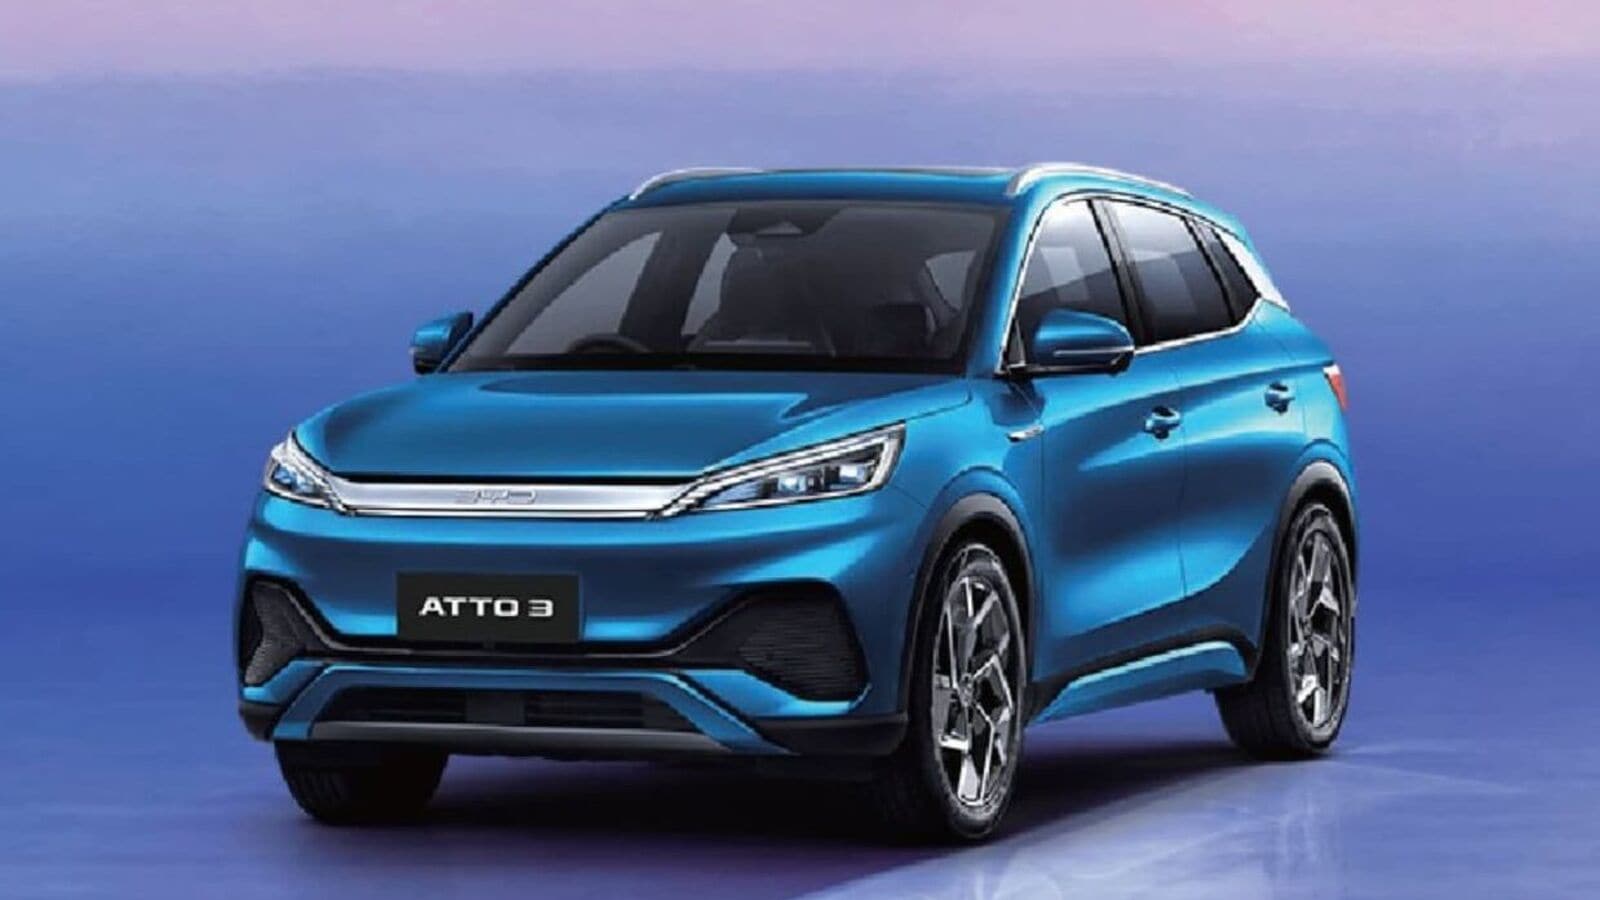 BYD Atto 3 electric SUV garners 1,500 bookings within a month